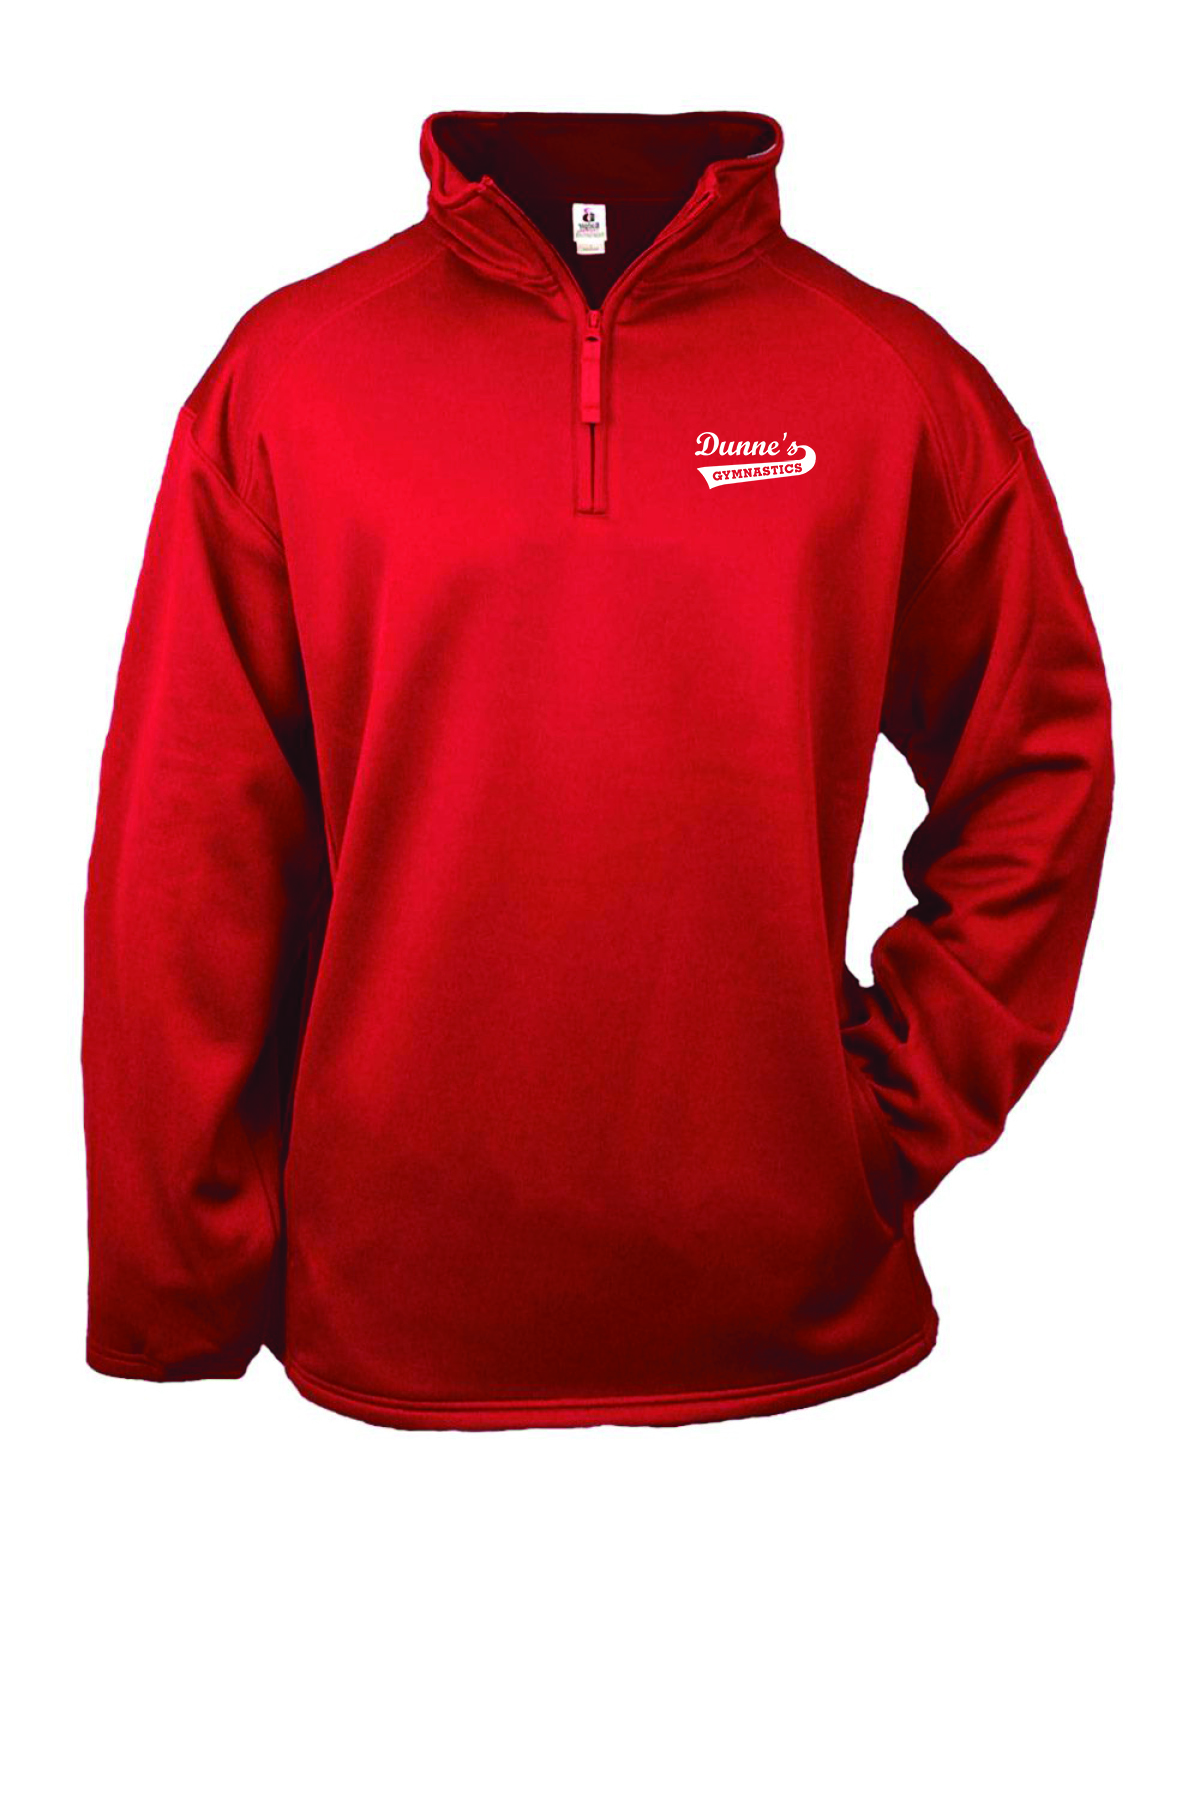 Augusta - Youth Wickig Quarter Zip Poly Fleece Pullover with Dunne's Logo